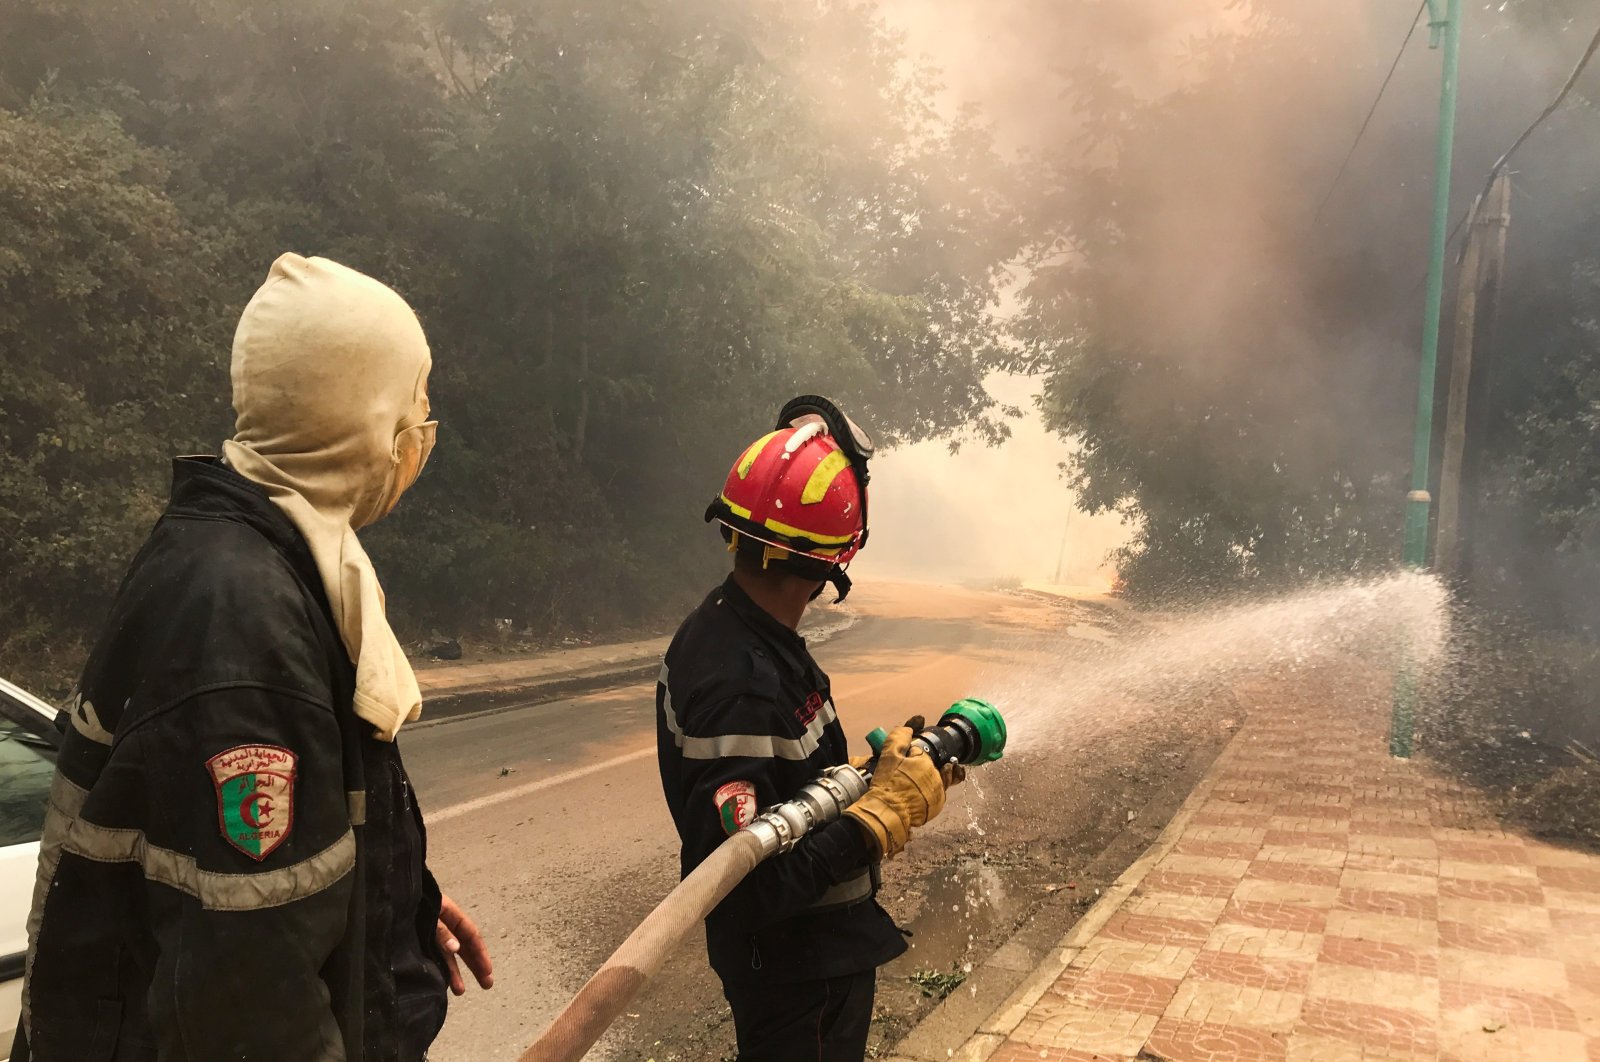 A firefighter uses a water hose during a forest fire in Ain al-Hammam village in the Tizi Ouzou region, east of Algiers, Algeria, Aug. 10, 2021. (Reuters Photo)